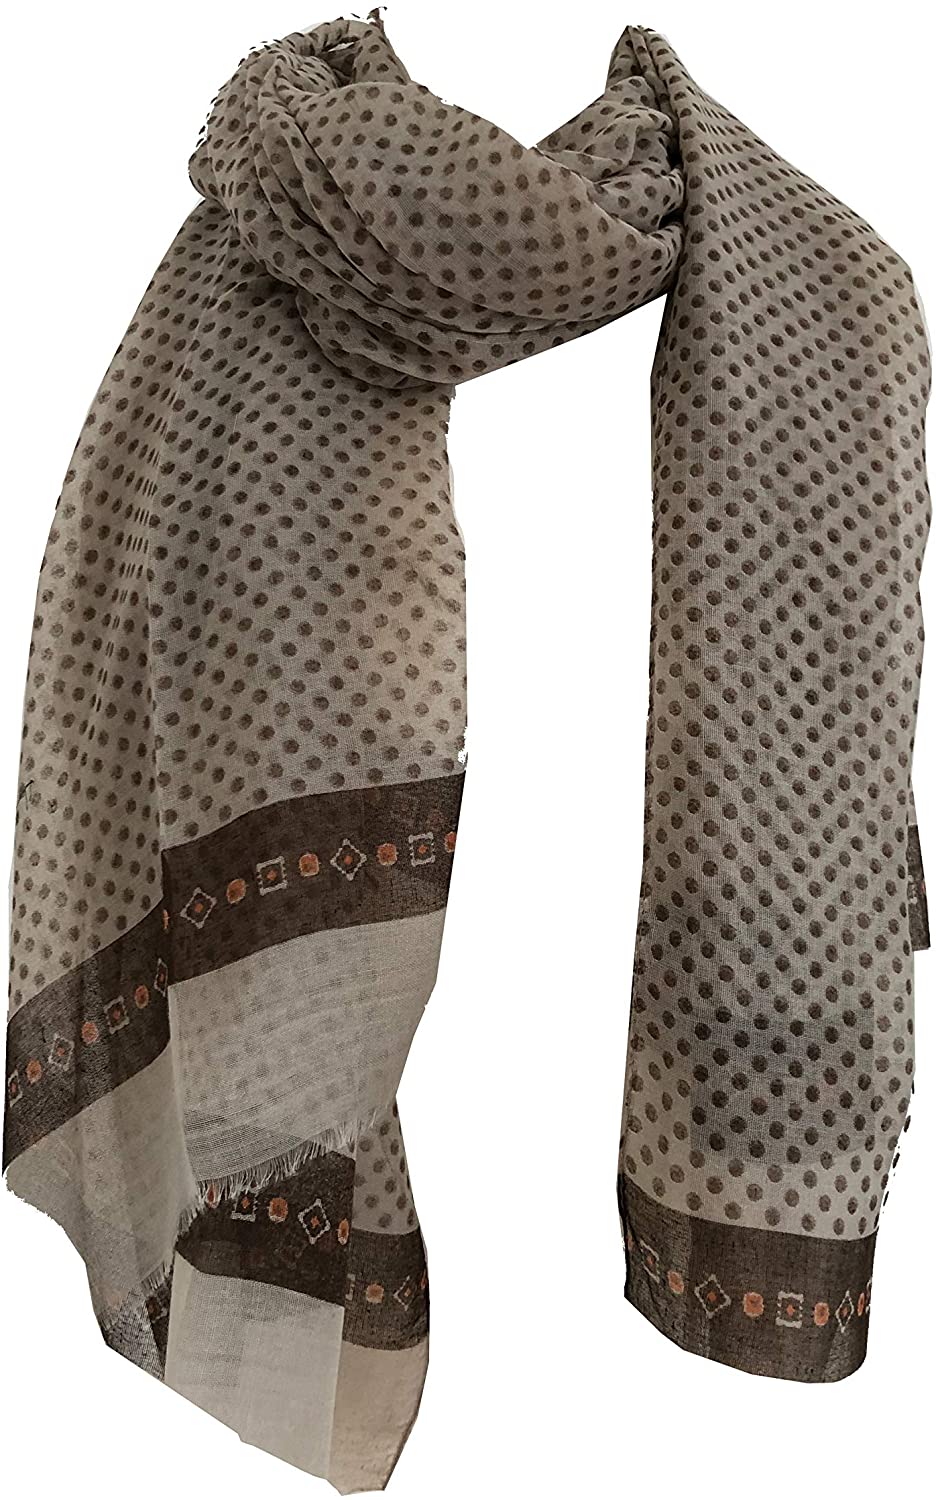 Pamper Yourself Now Light Brown Scarf with Dark Brown Spotty Scarves with Borders, Long, Soft, Pretty Scarf/Wrap